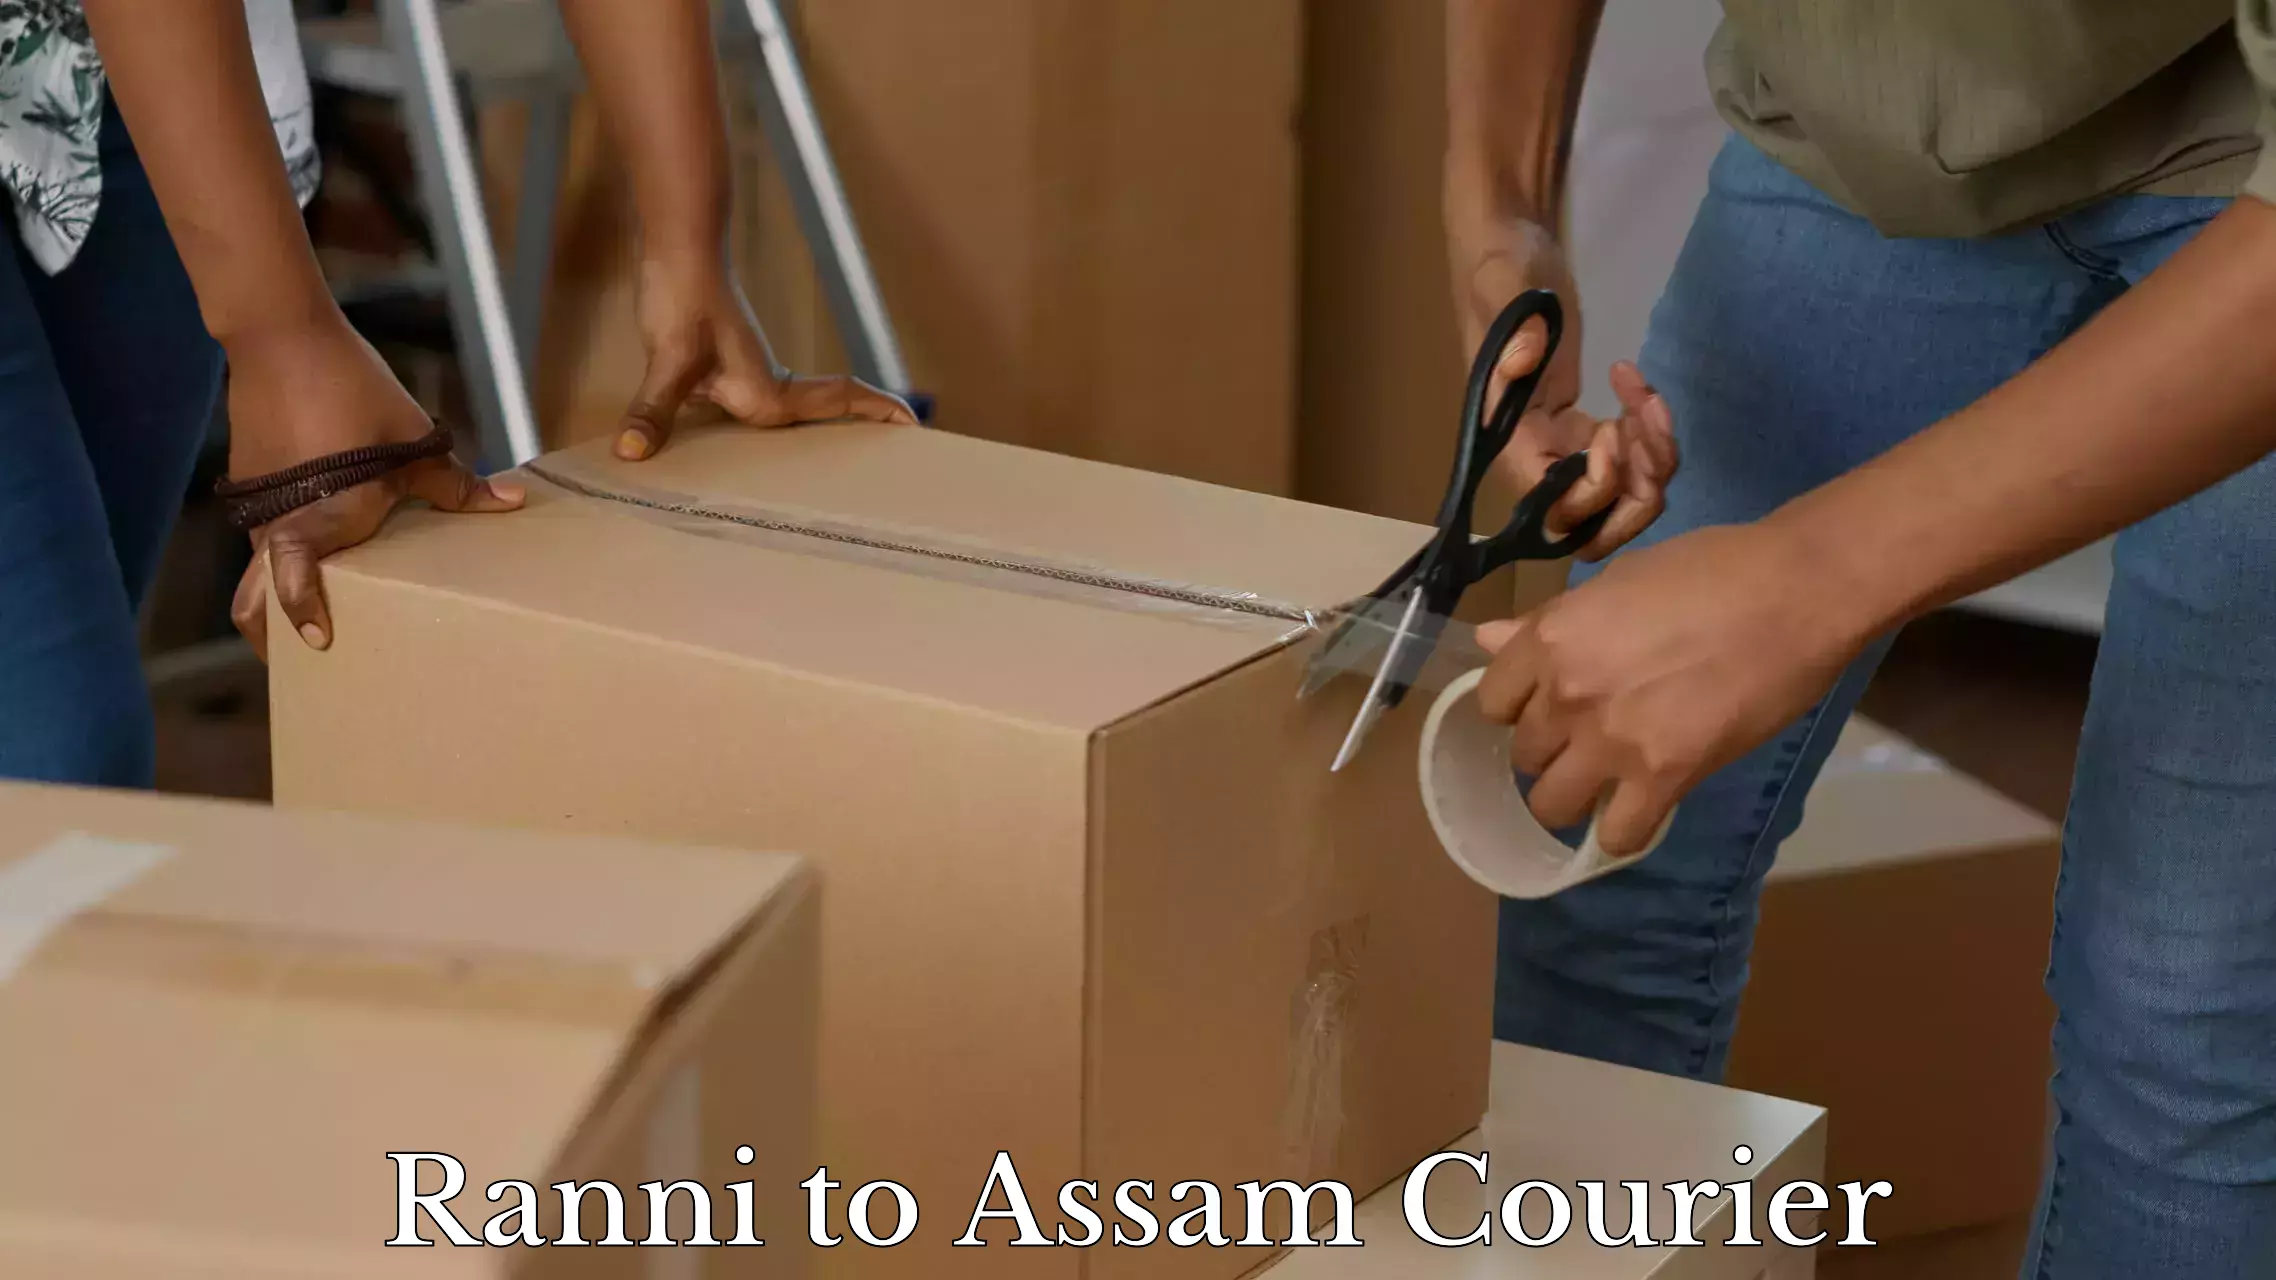 Luggage delivery network Ranni to Assam